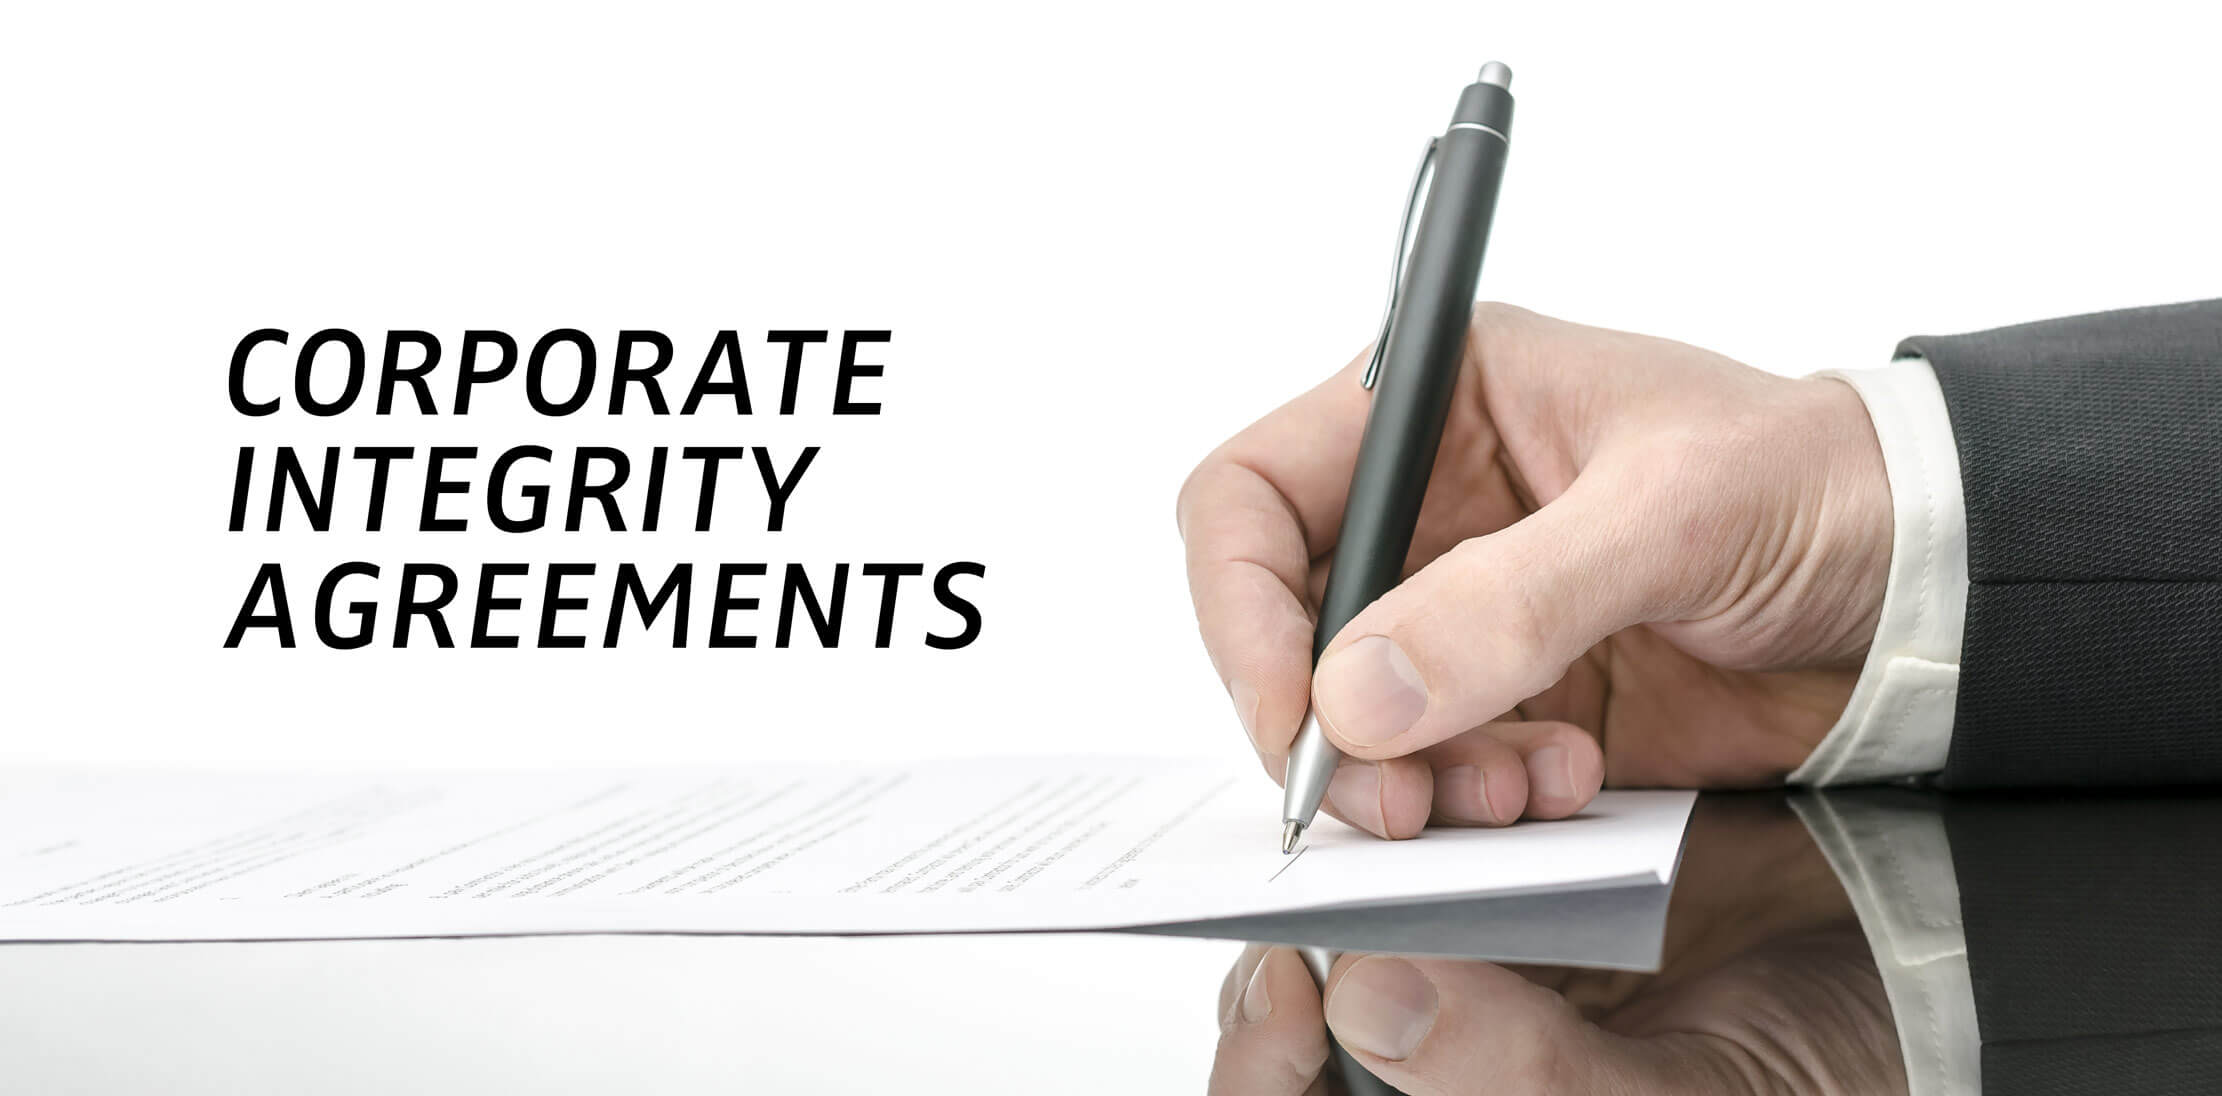 Corporate Integrity Agreements